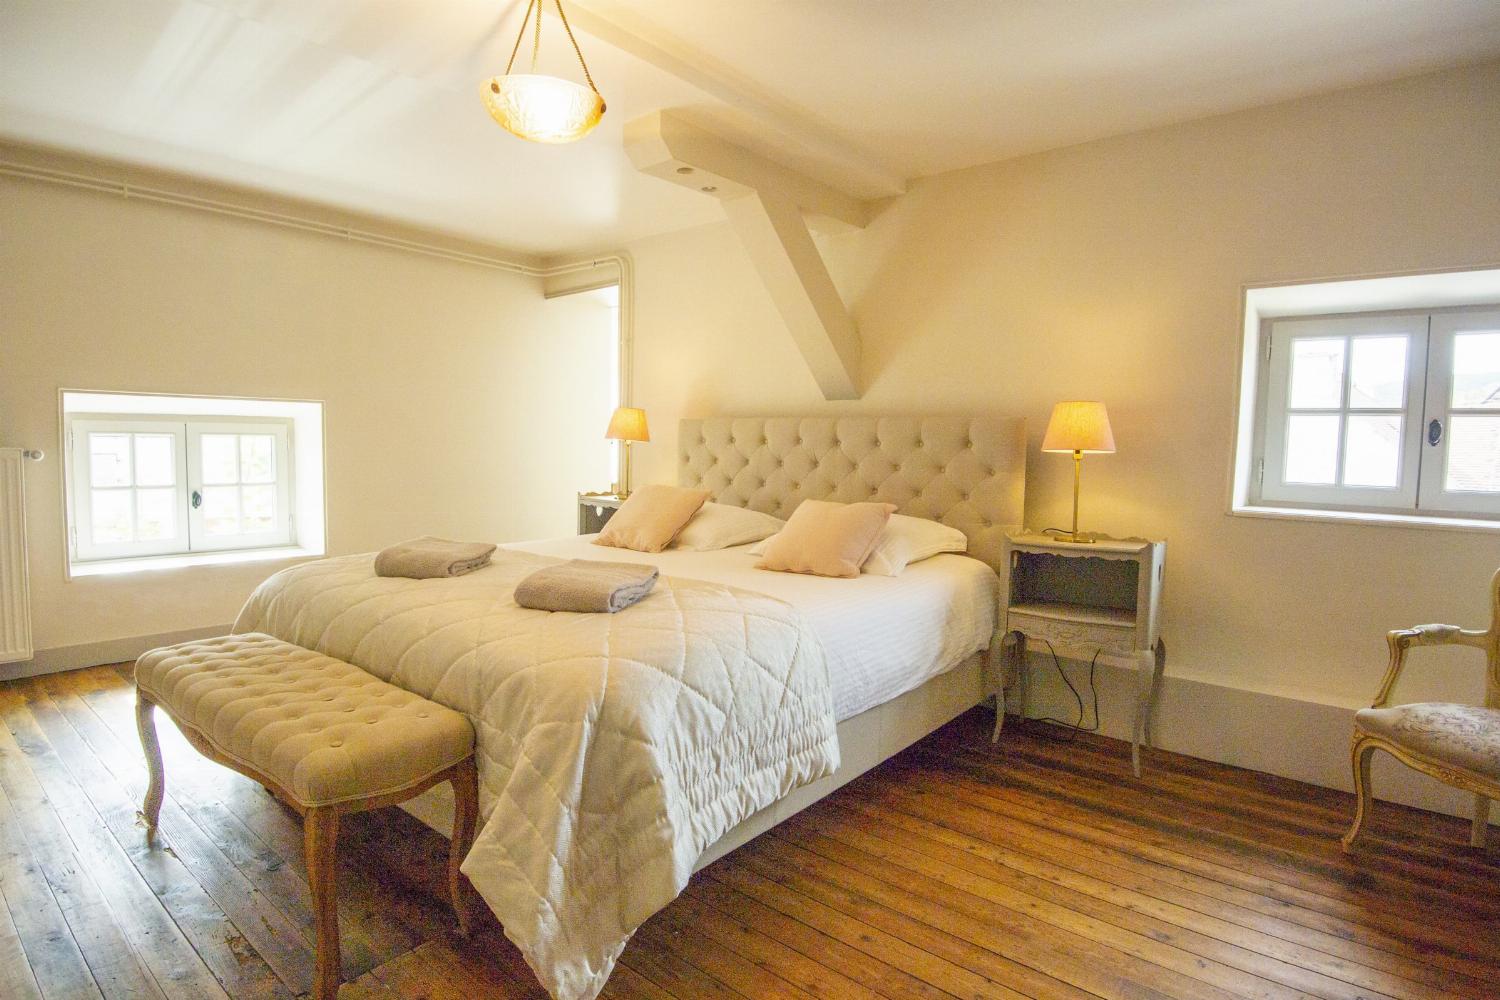 Bedroom | Self-catering accommodation in Pyrénées-Atlantiques